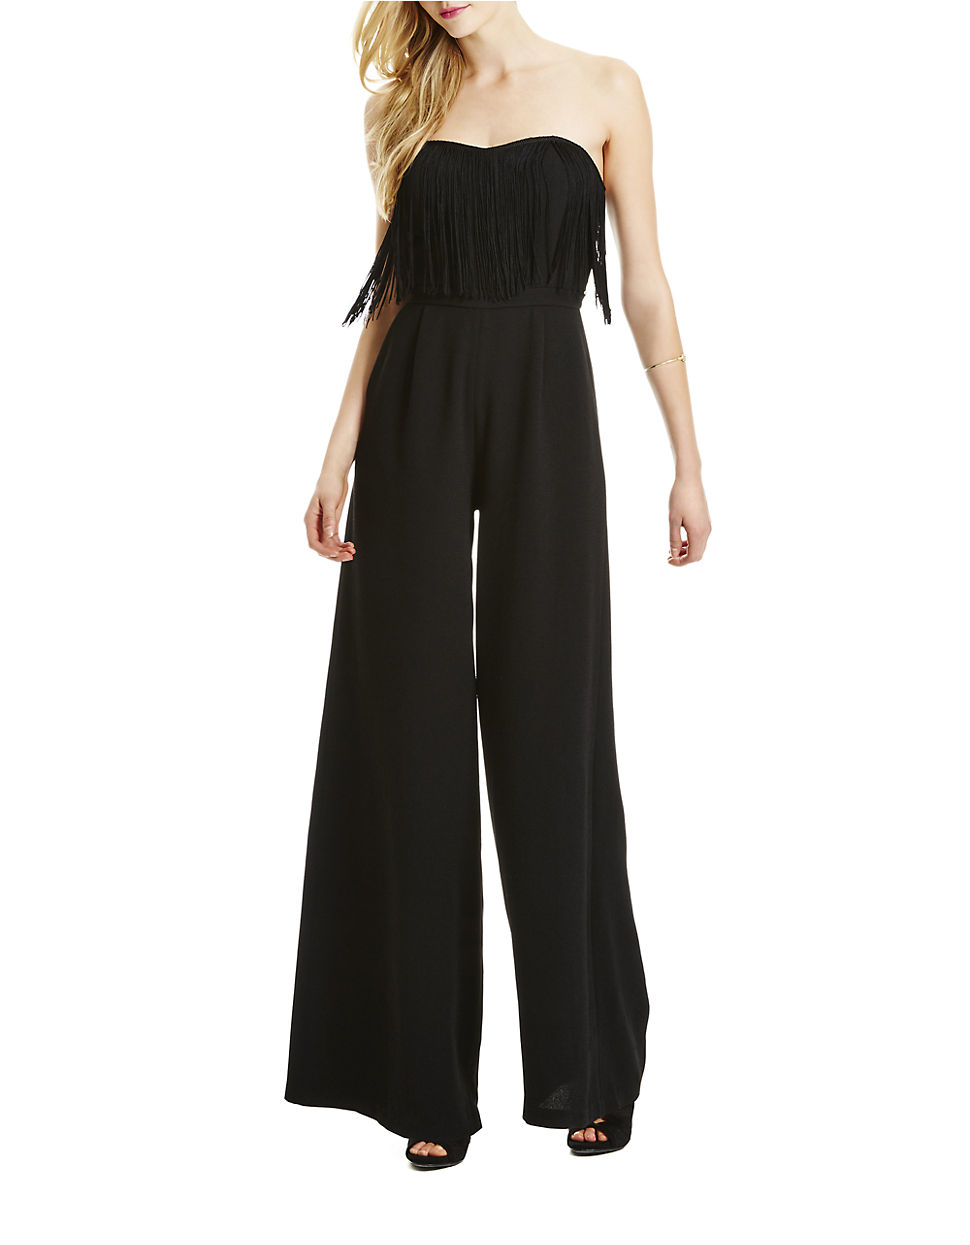 Jessica simpson Fringed Strapless Jumpsuit in Black | Lyst